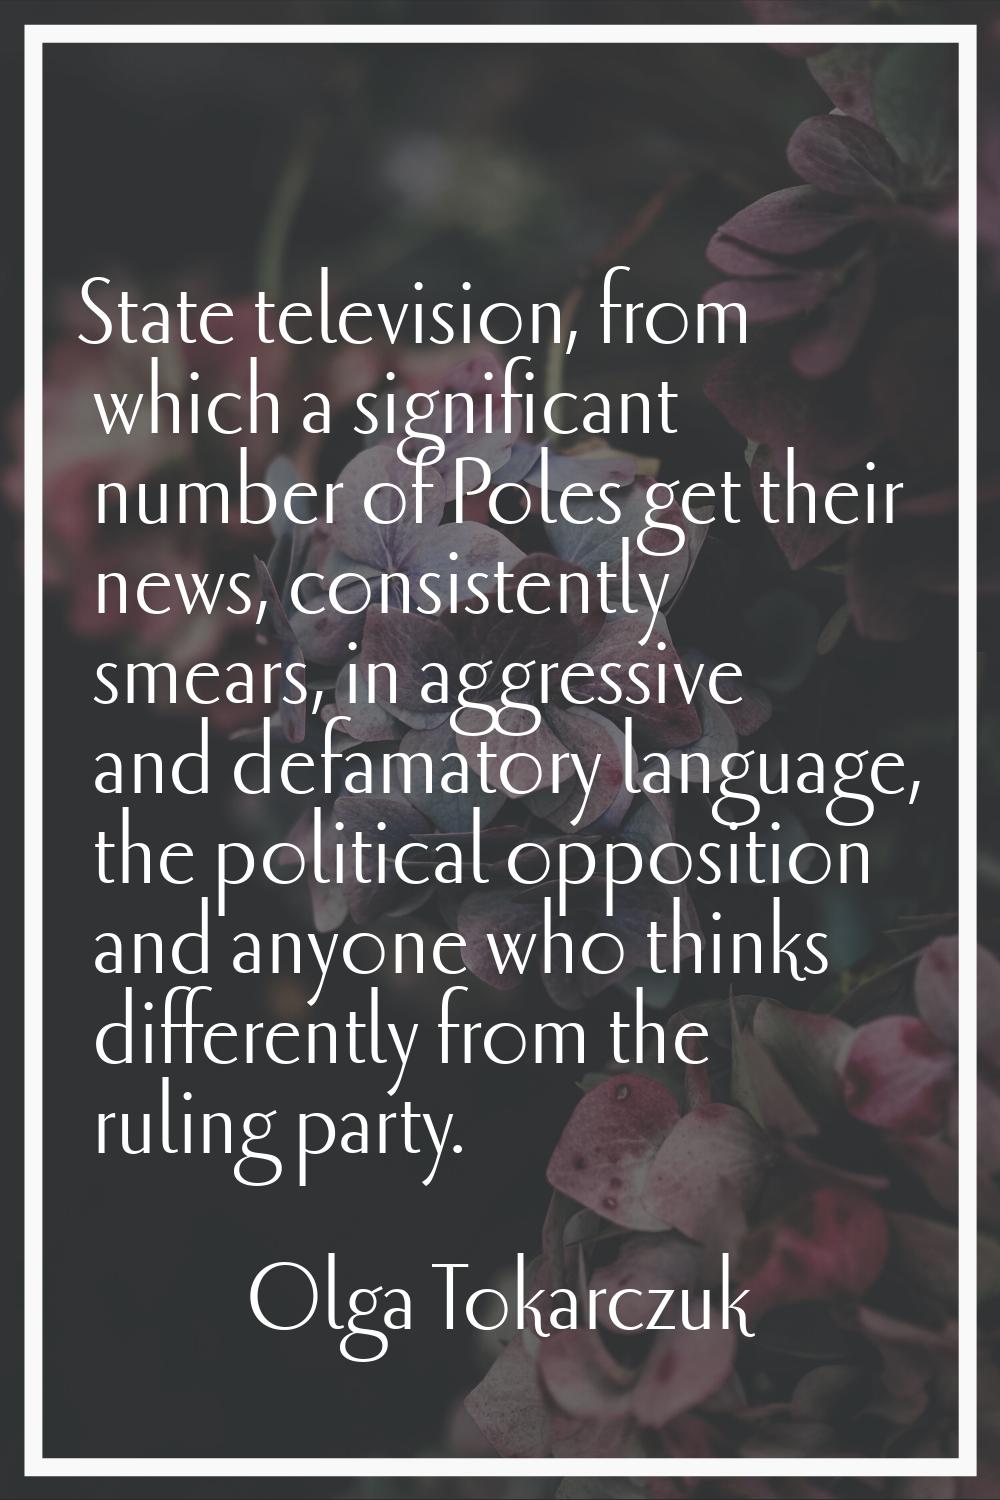 State television, from which a significant number of Poles get their news, consistently smears, in 